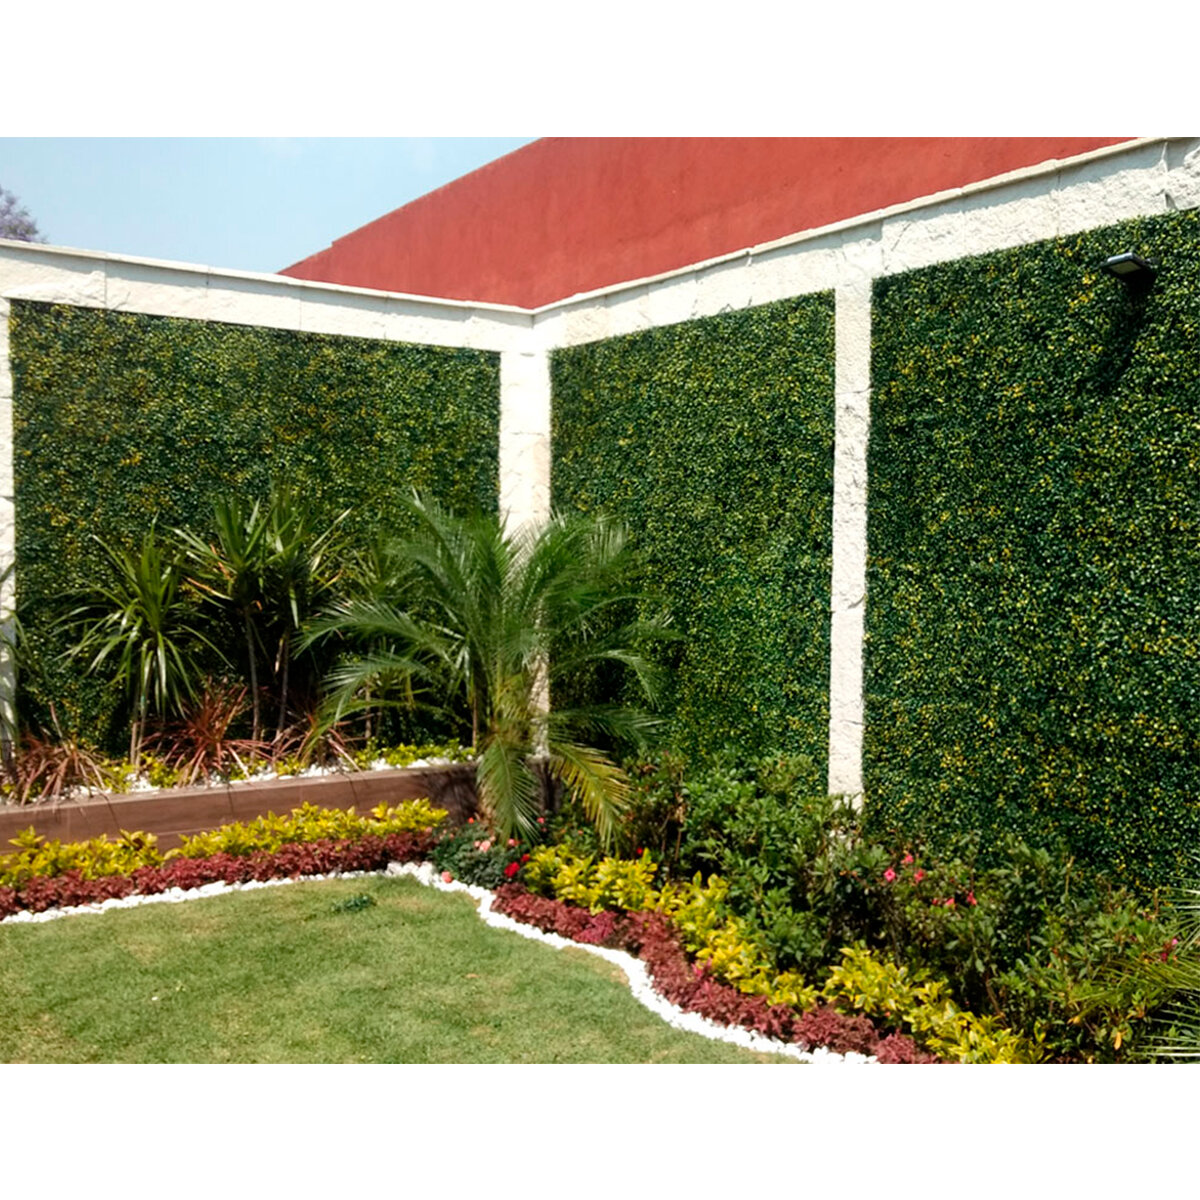 Greenery Ivy Leaf Fencing Fake Leaf Screen Home Garden Outdoor Natural Screens Decoration Pack of 6pcs 20x20 Uland Artificial Boxwood Hedges Screening Panels